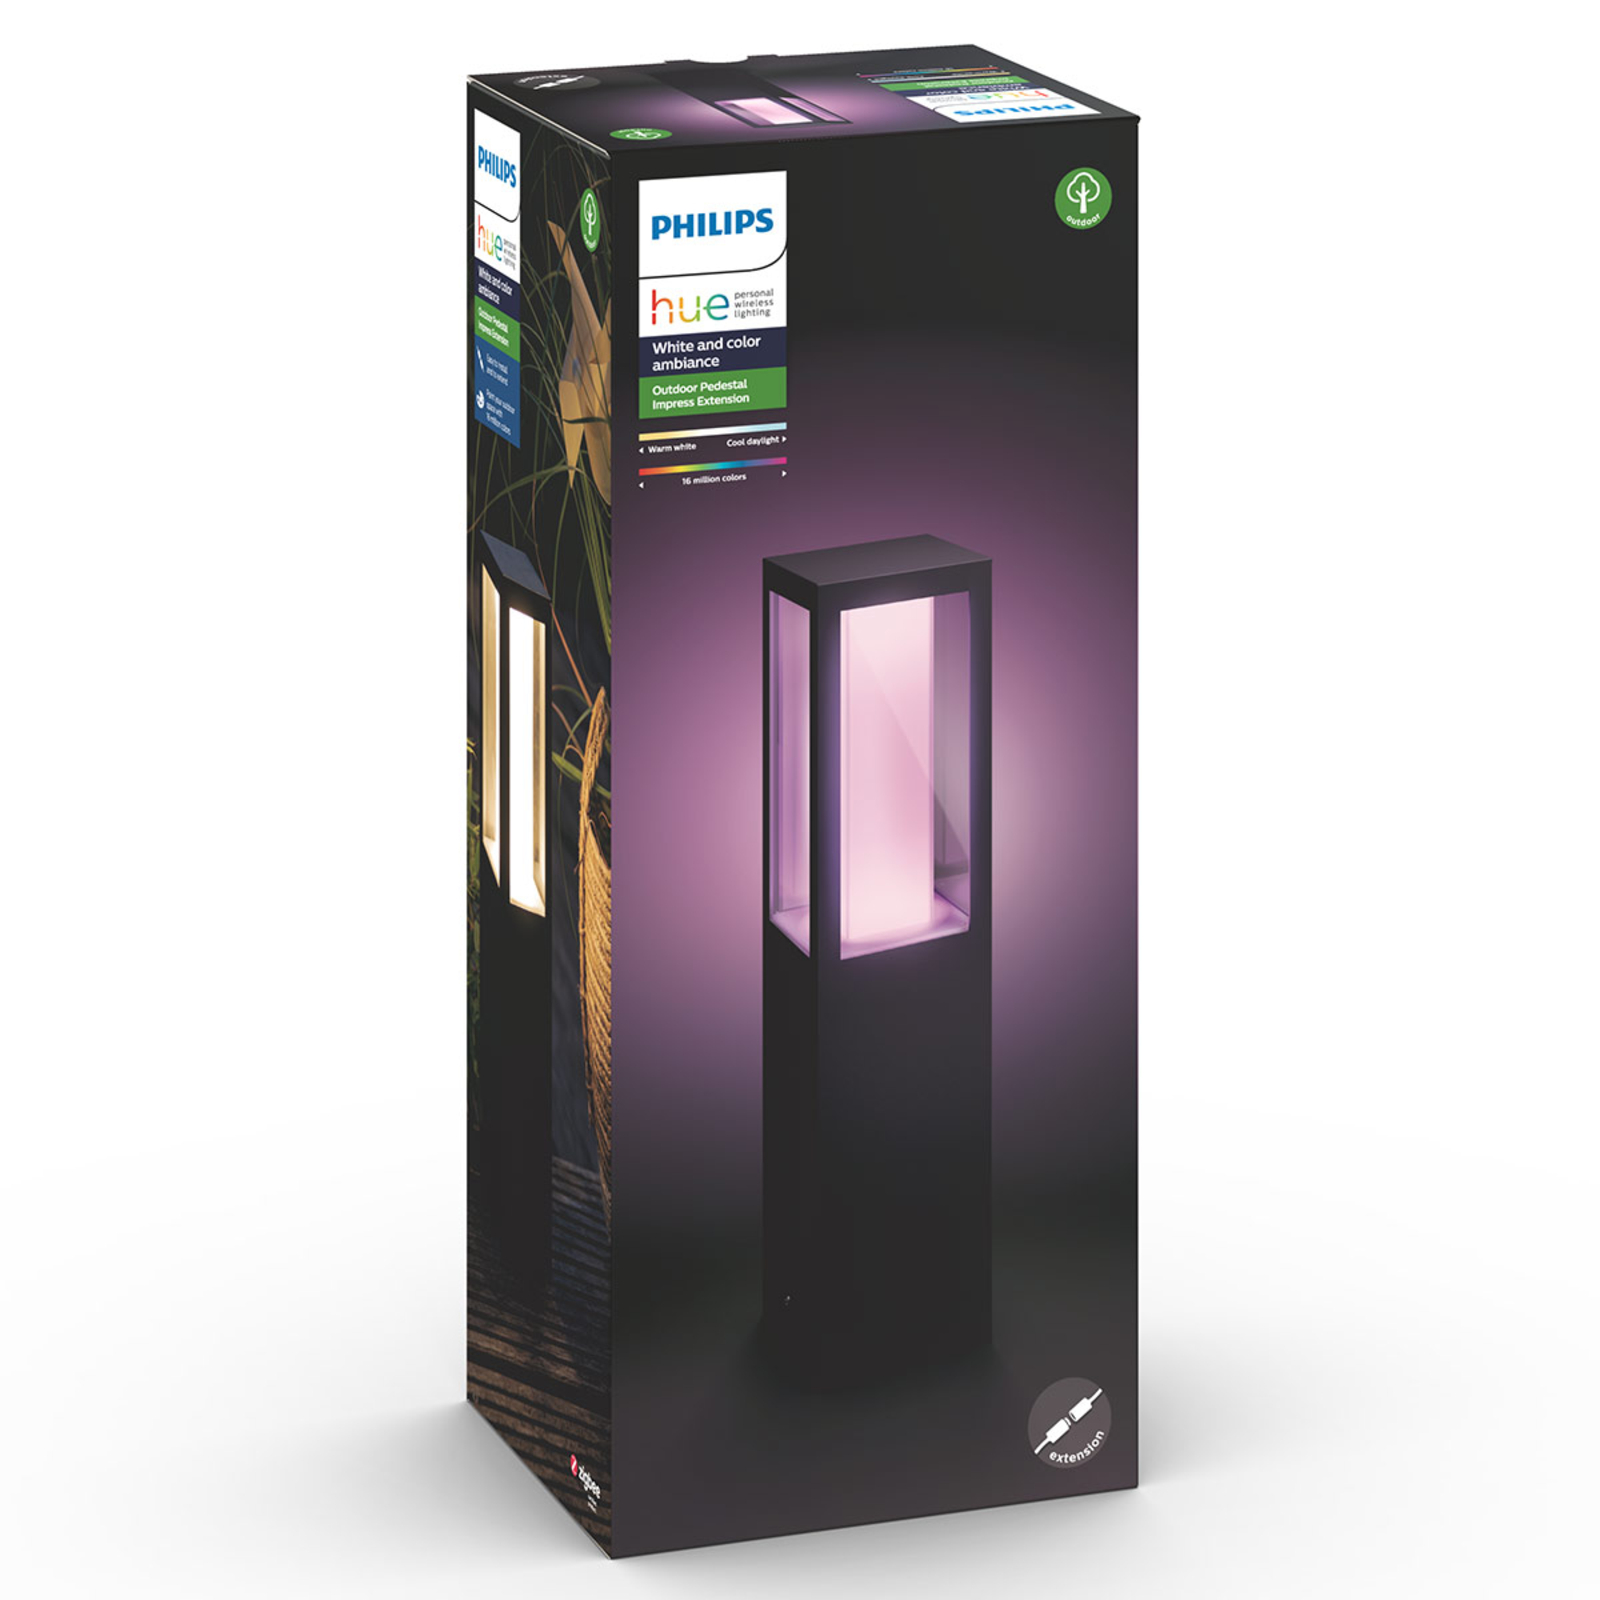 Philips Hue Impress potelet, extension